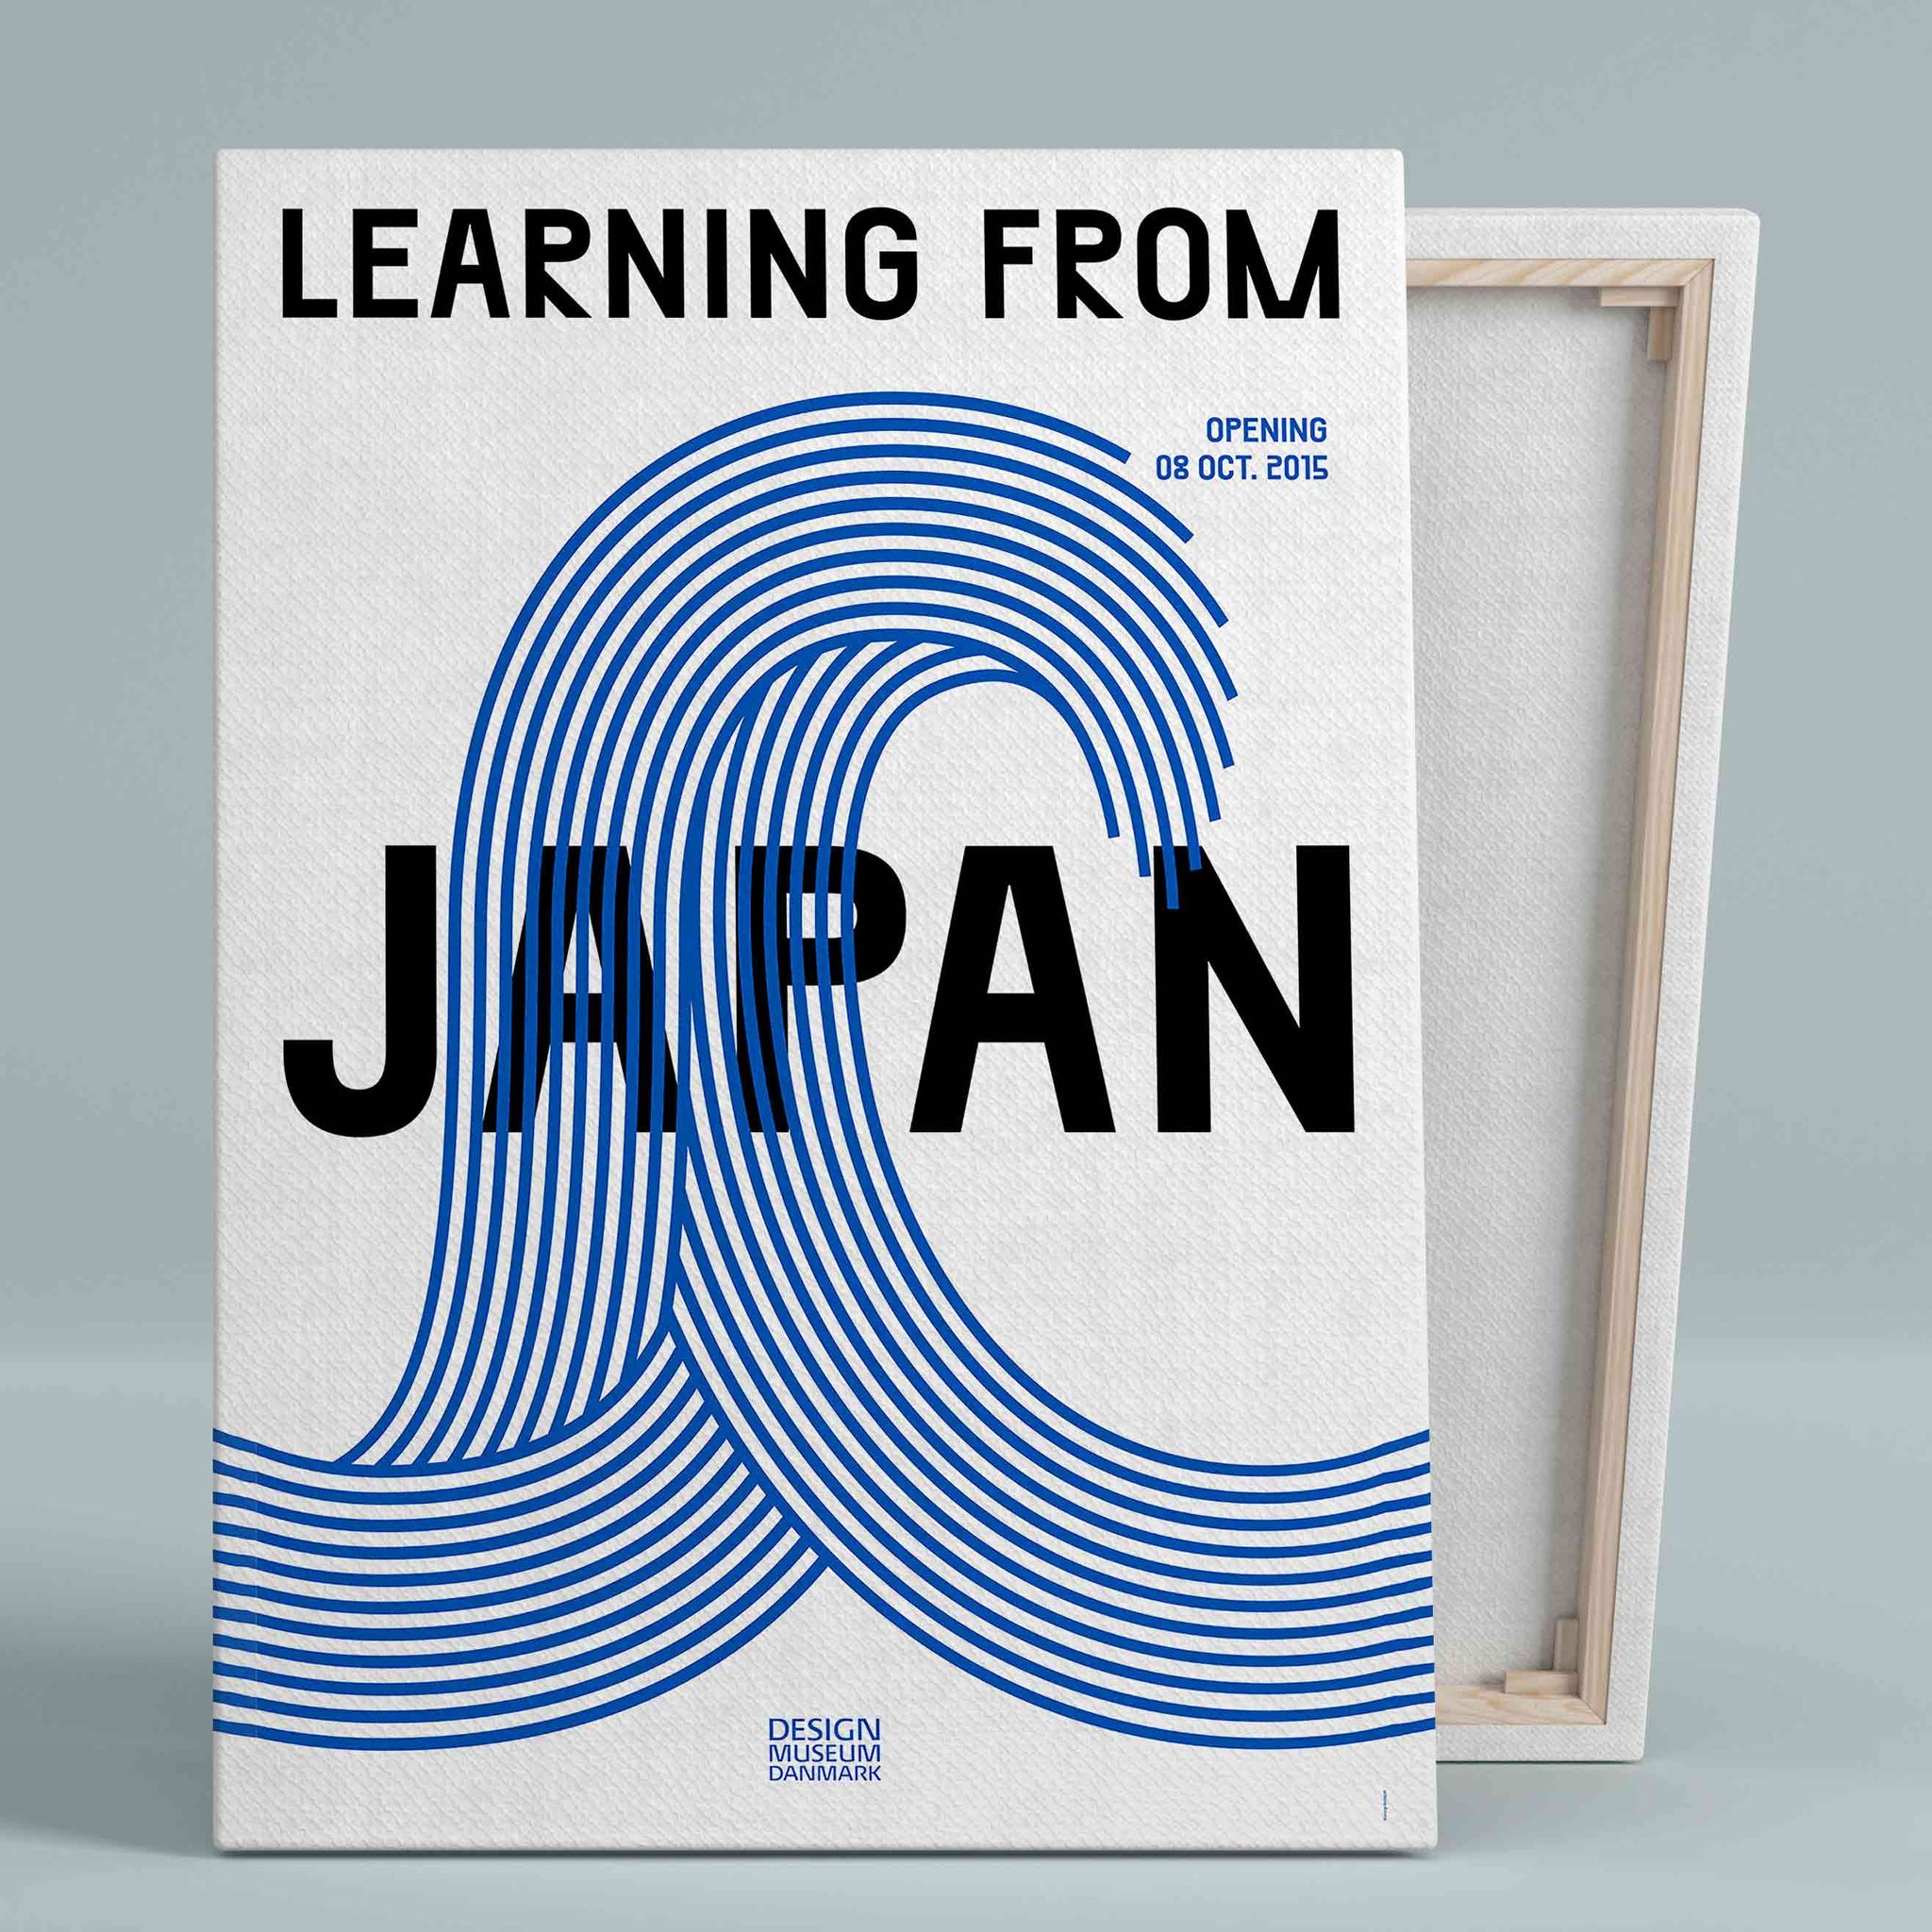 Learning From Japan Canvas, Japan Canvas, Tsunami Canvas, Wall Art Canvas, Gift Canvas